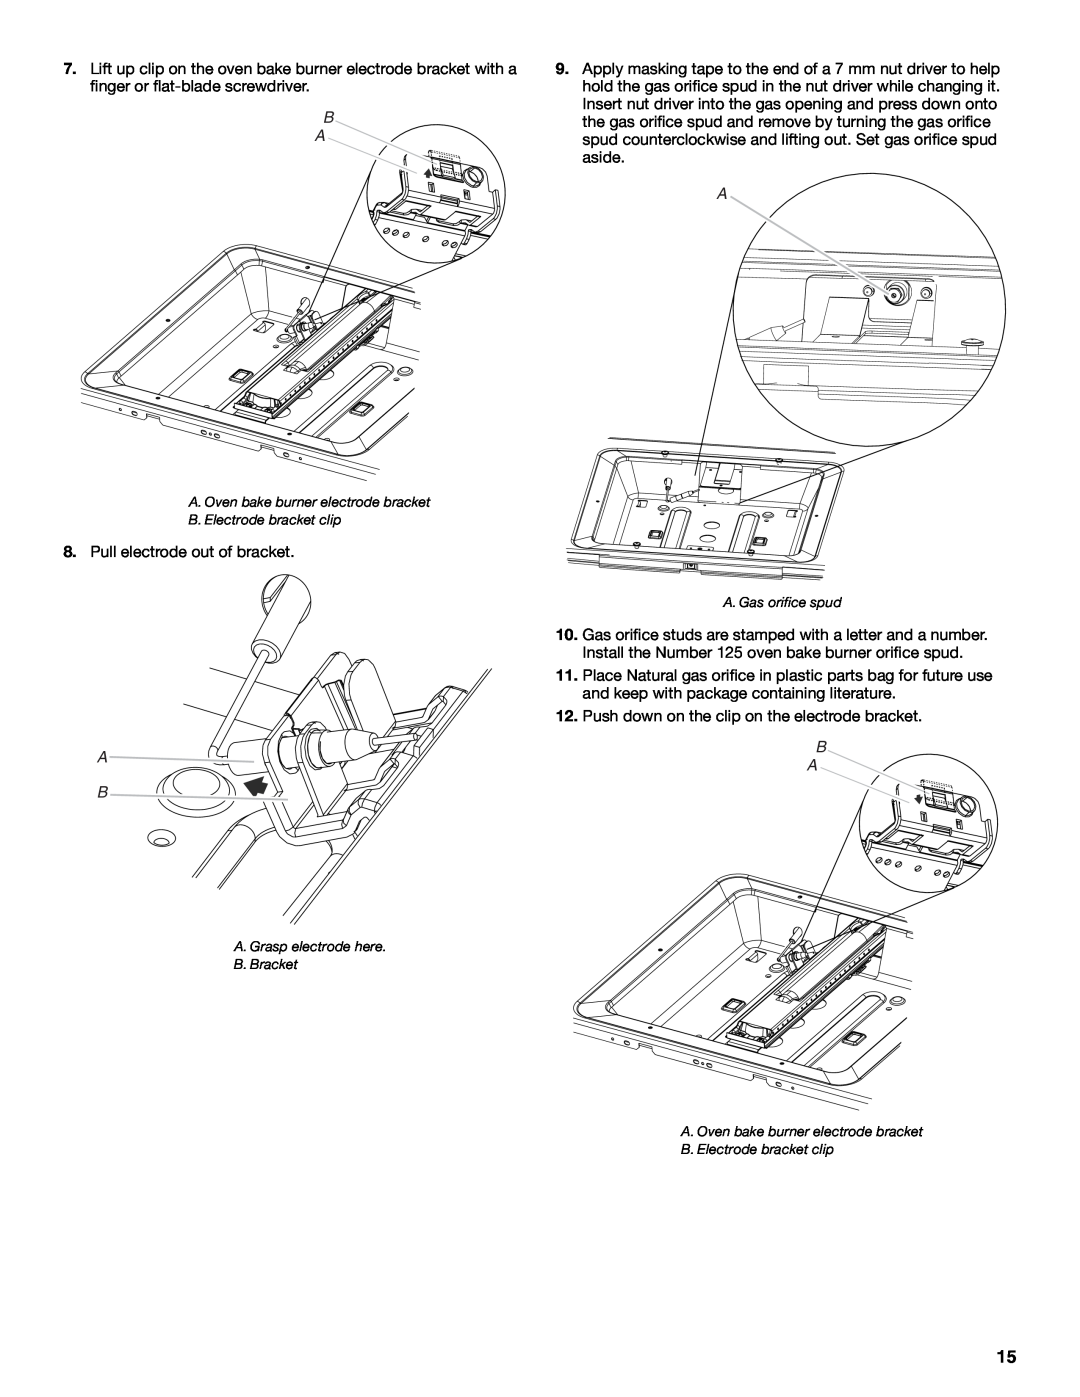 Jenn-Air W10394575A installation instructions Pull electrode out of bracket 